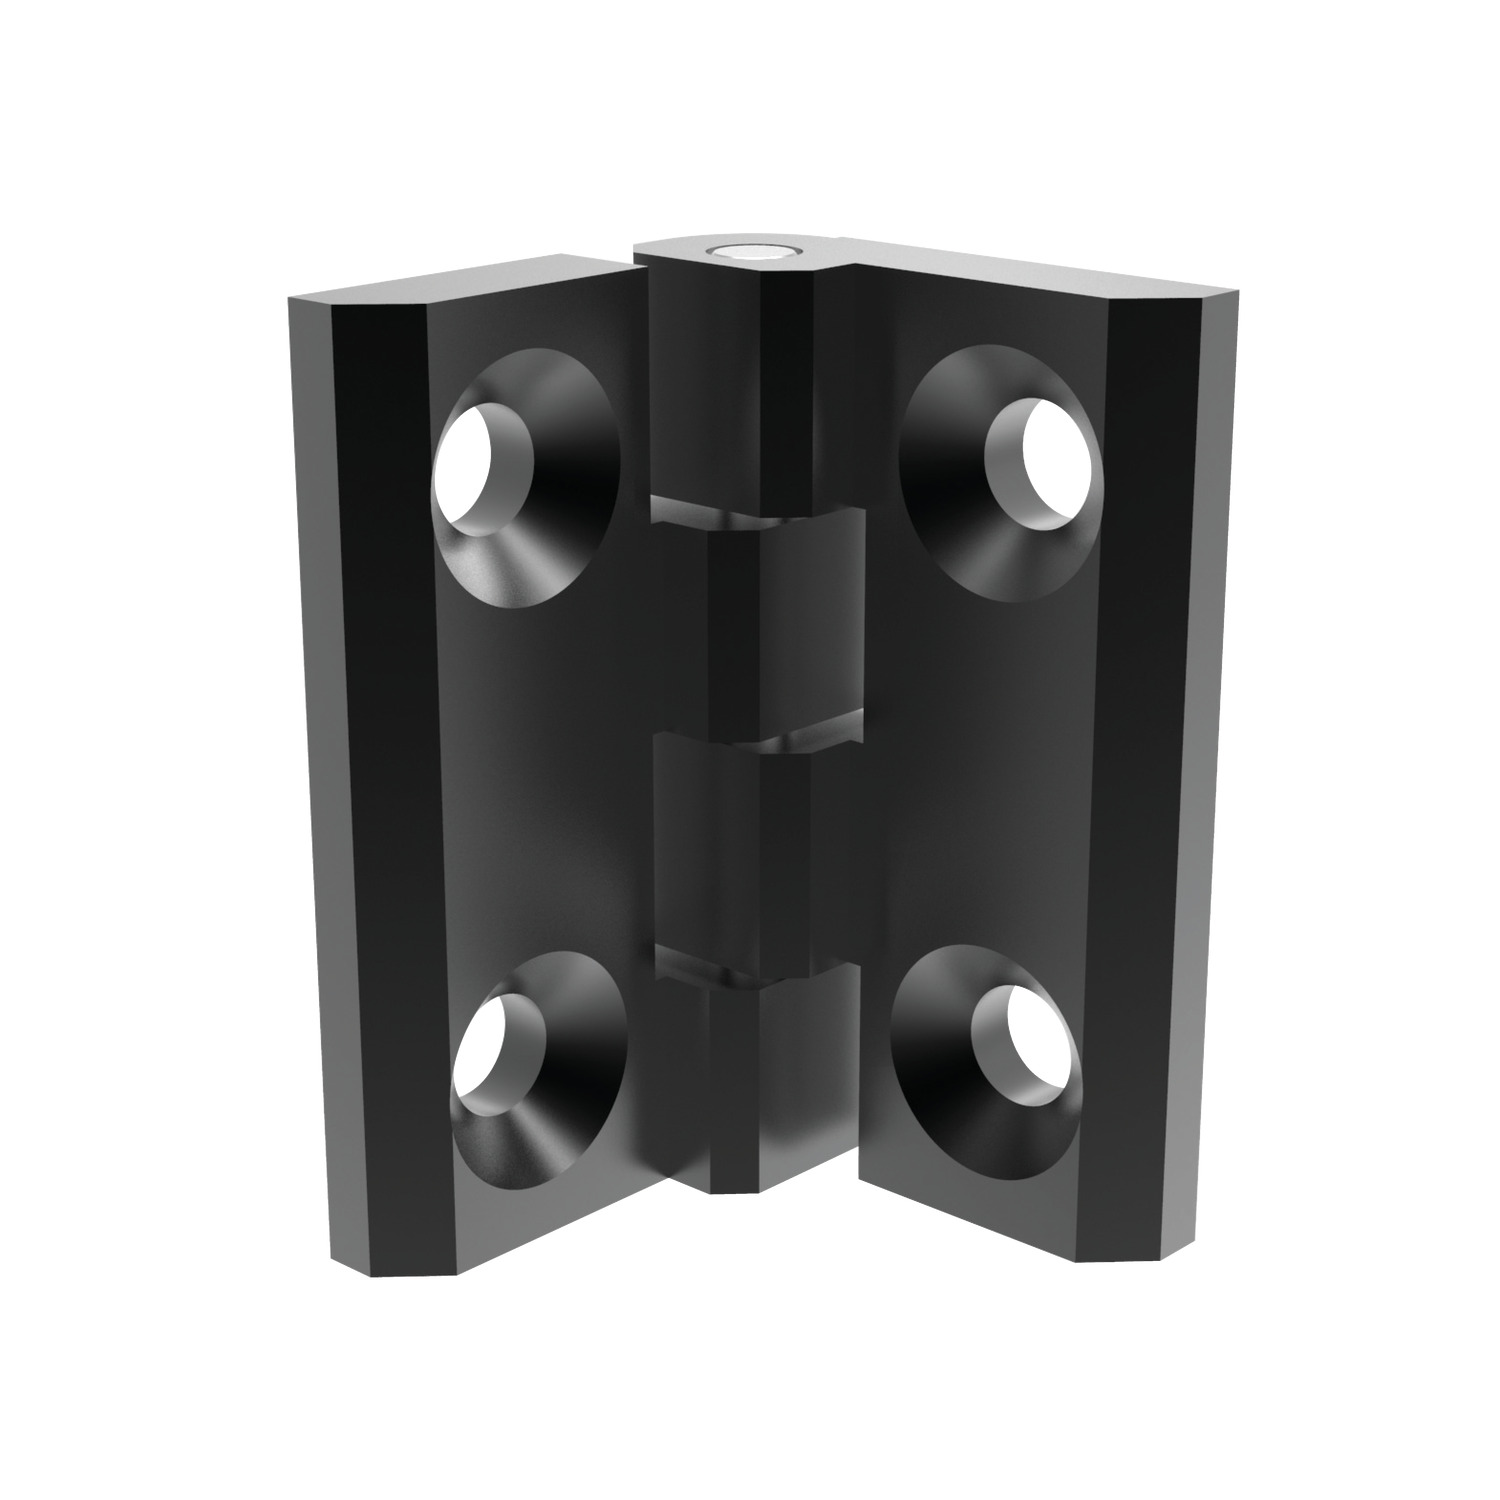 Surface Mount - Leaf Hinges For plain/flush mounted doors, as well as electrical panels and covers. Made from die cast zinc with black powder coat.